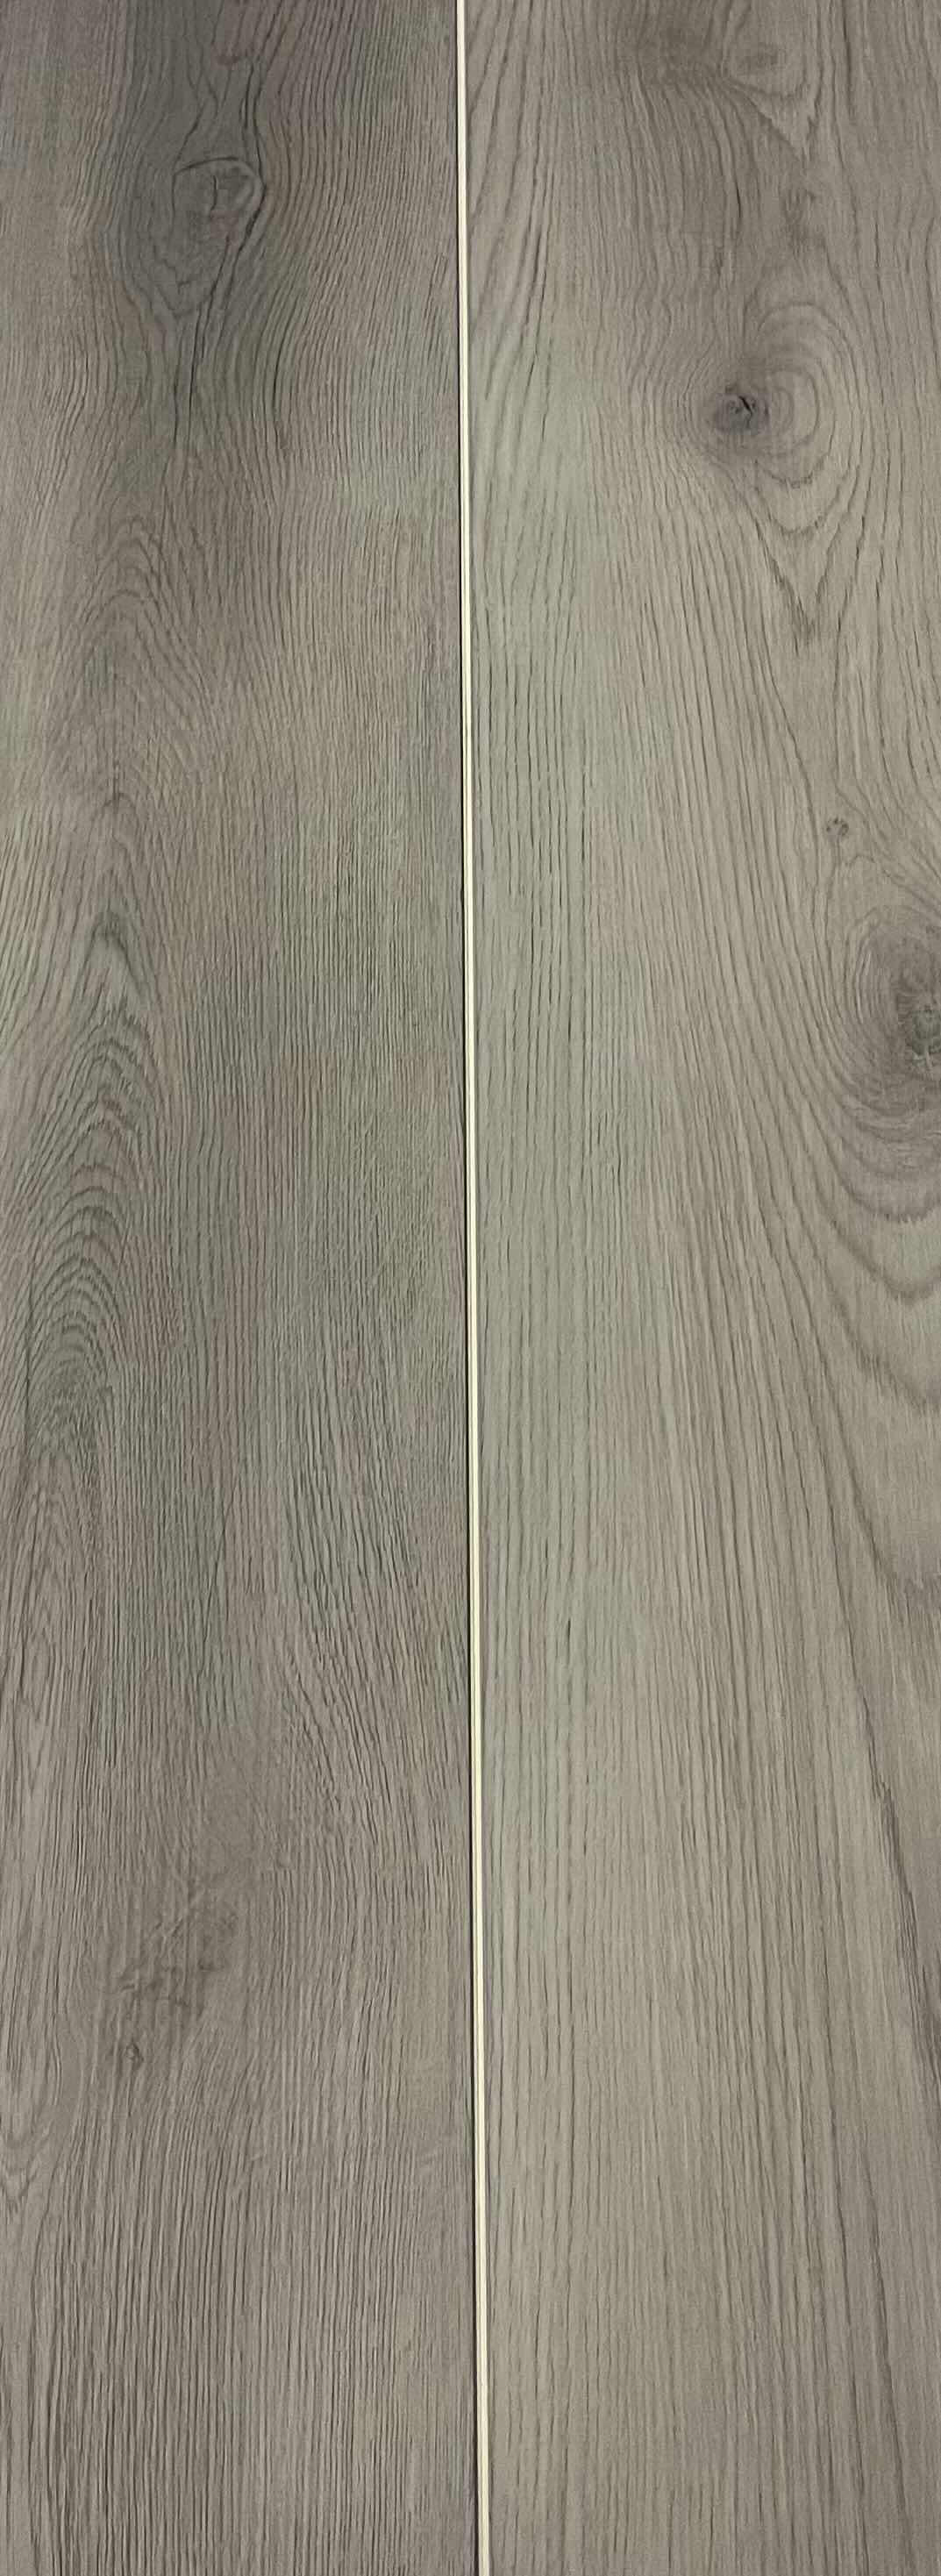 Photo 1 of ROYAL HOUSE PLANET COLLECTION SATURN WOOD FINISH SNAP IN CLICK VINYL PANEL FLOORING 9” X 60” (22.60SQFT PER CASE/49CASES APPROX 1107.4SQFT TOTAL) READ NOTES